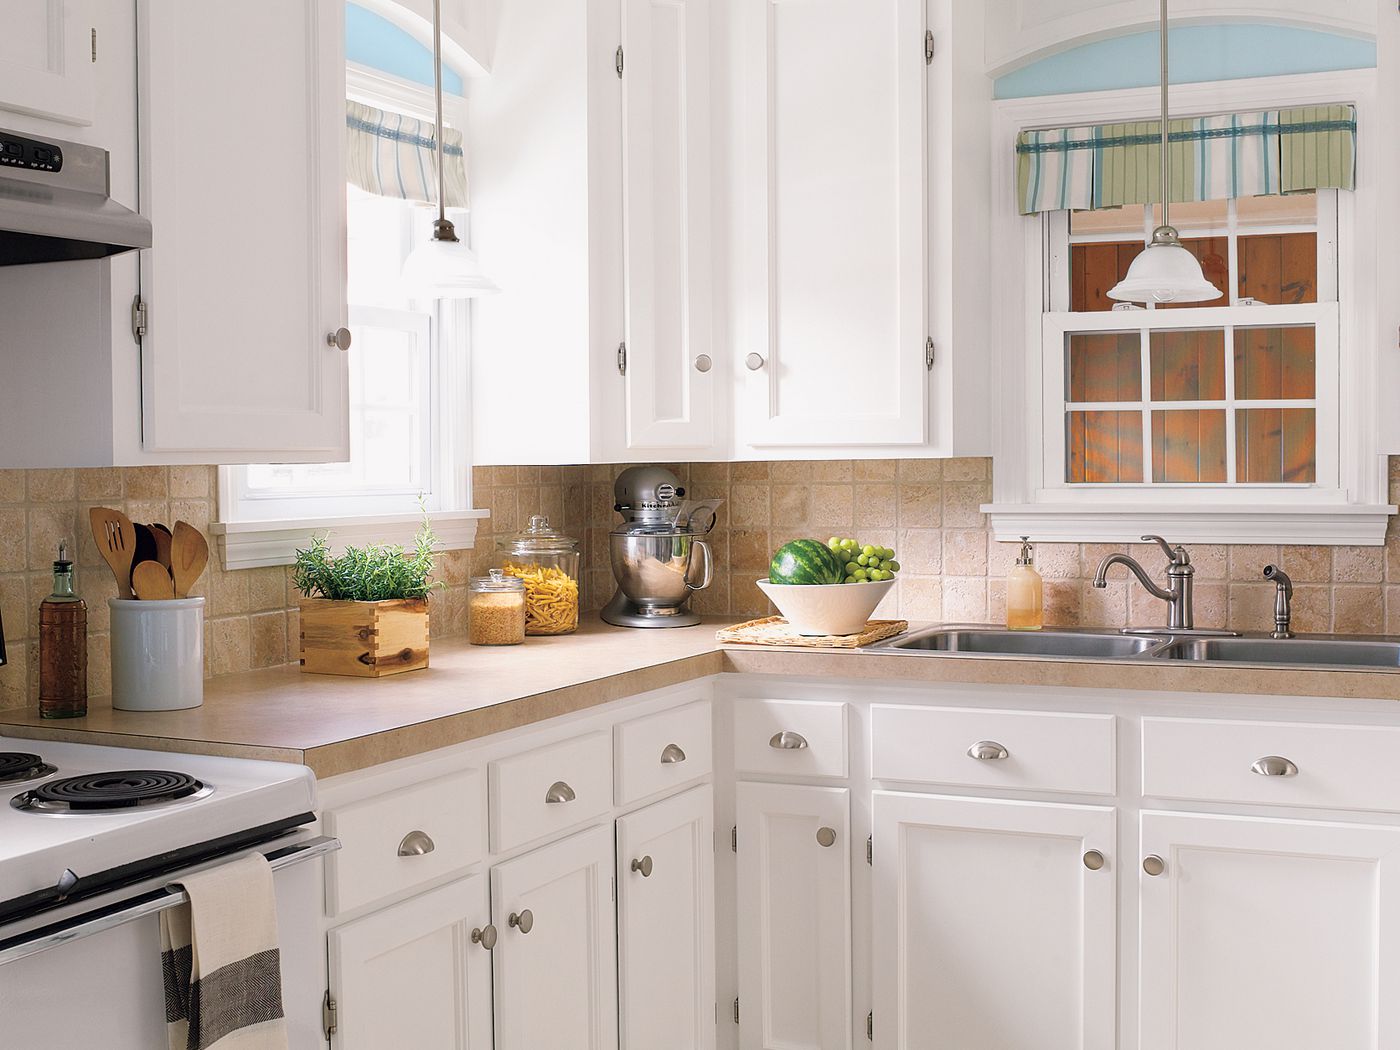 How to Remodel a Kitchen on a Budget 